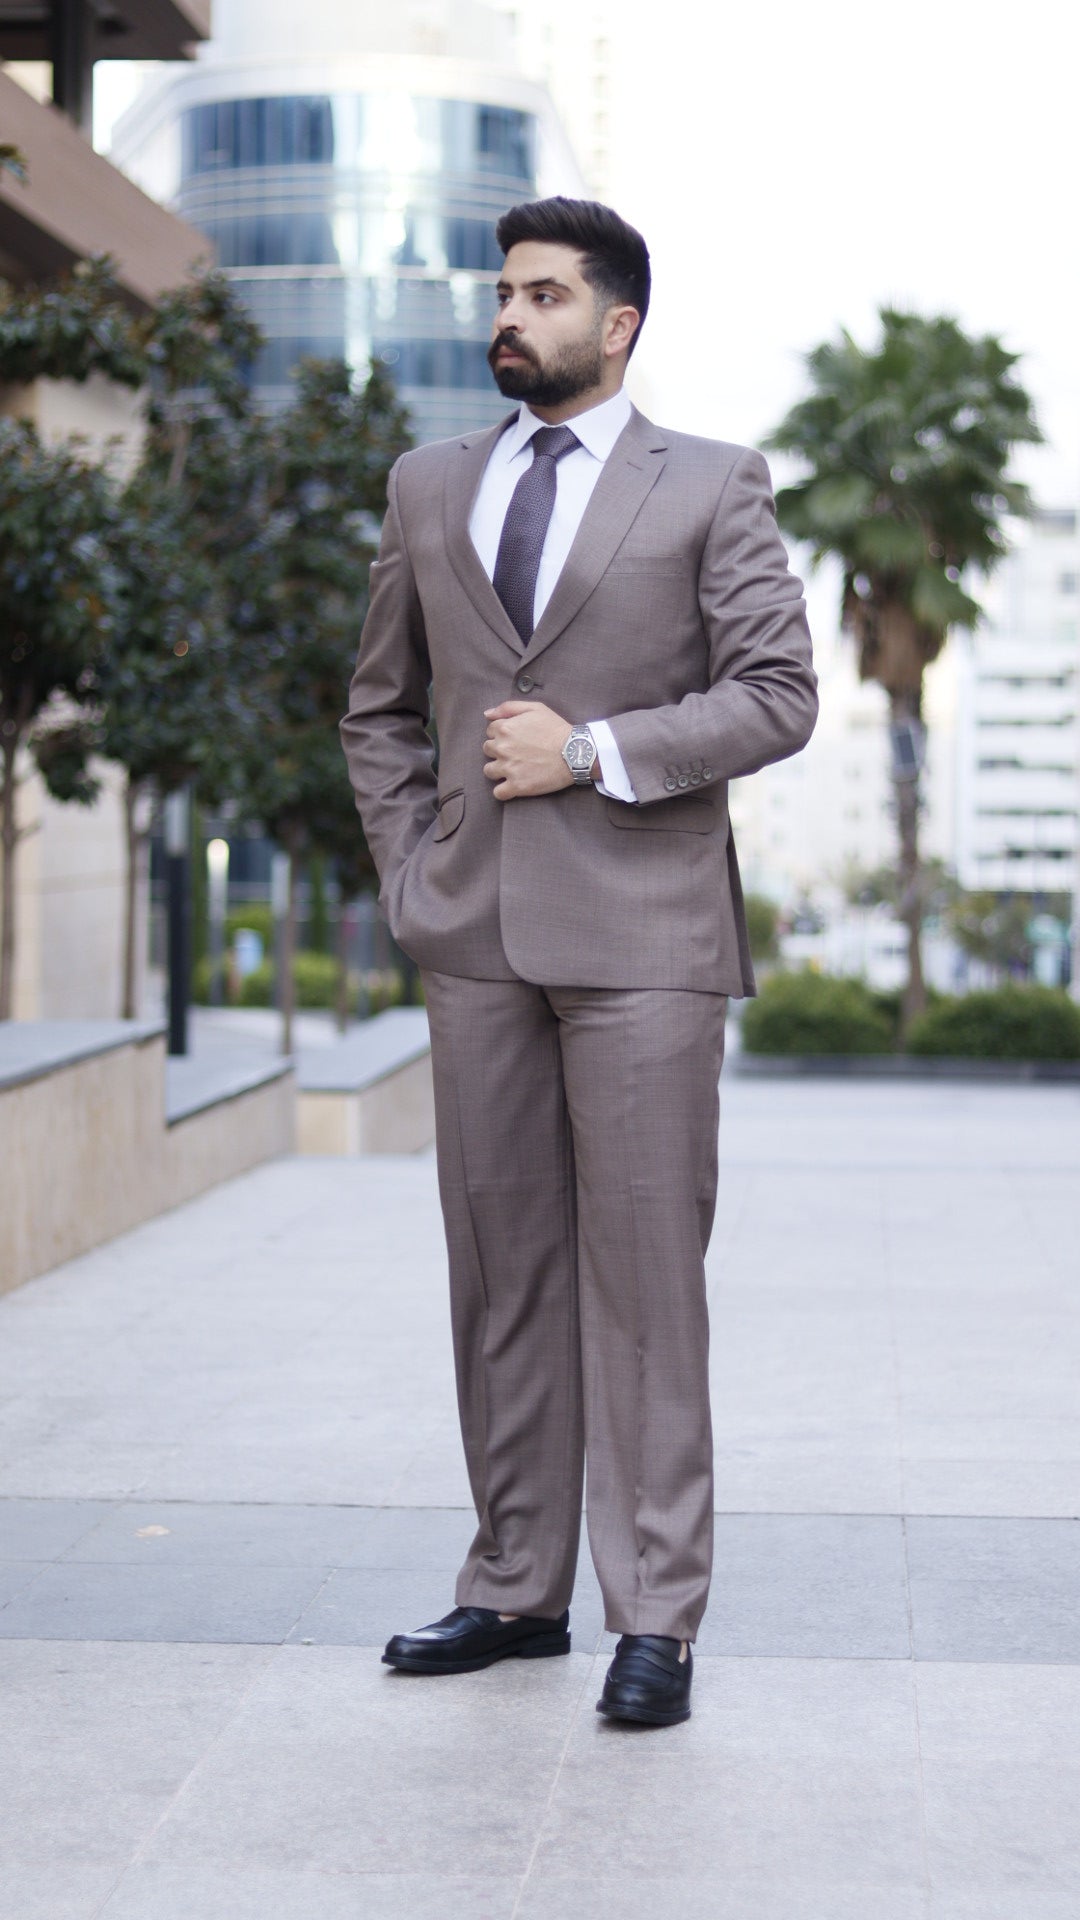 The Manager Suit - High Quality Men's Suit